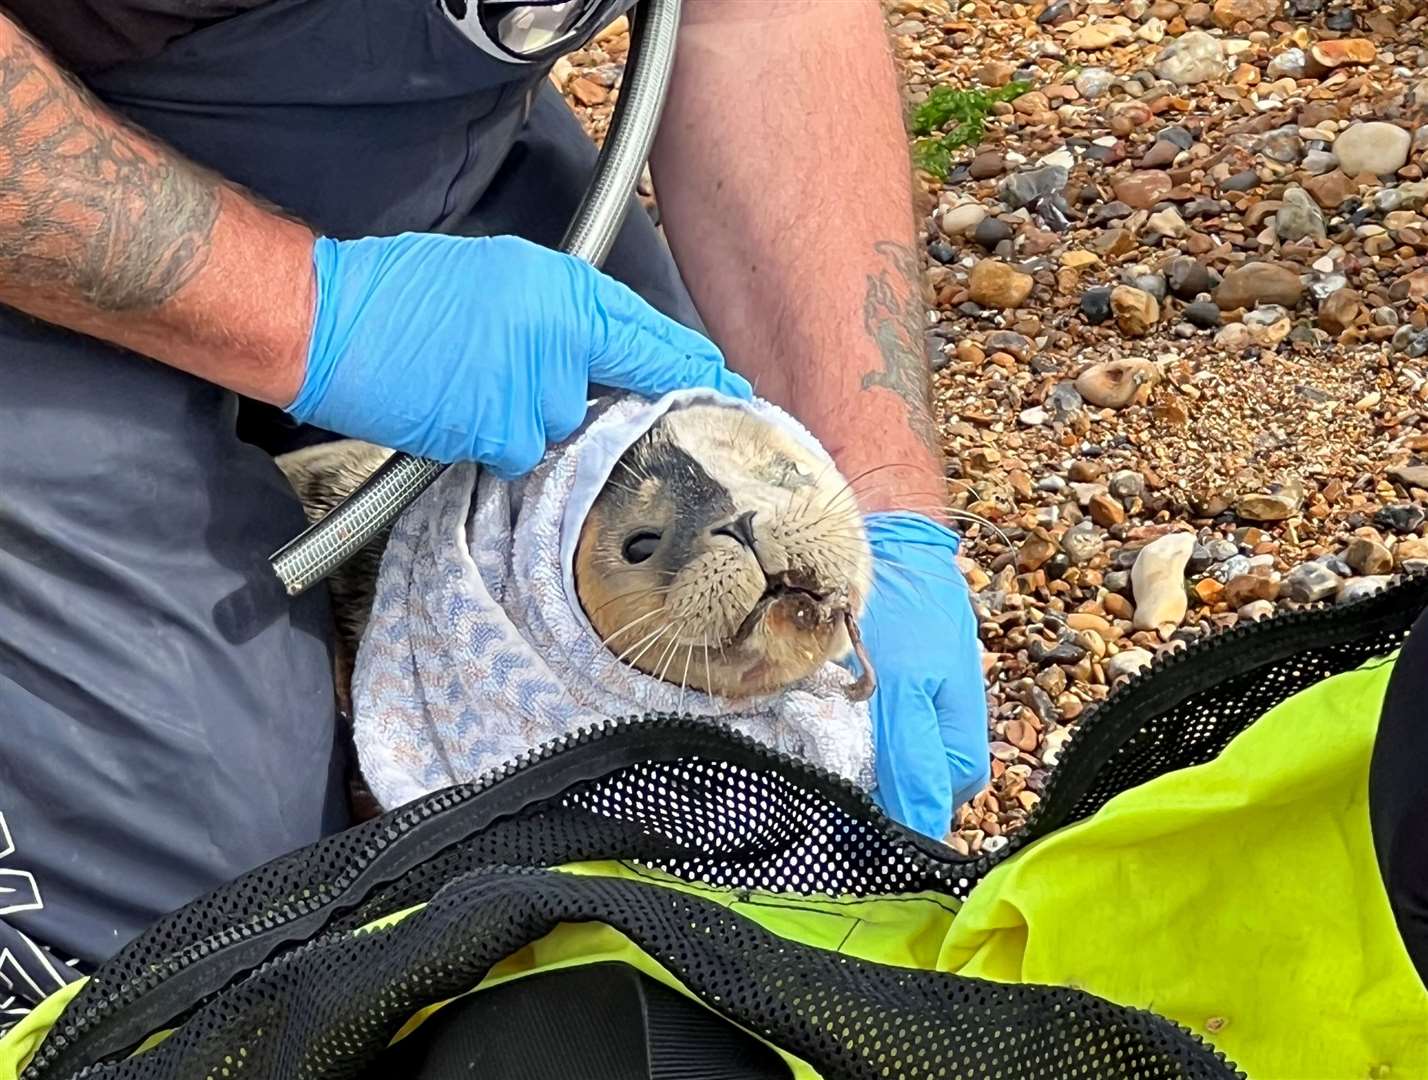 The seal pup suffered a trauma to the face. Picture: Wesley Baker